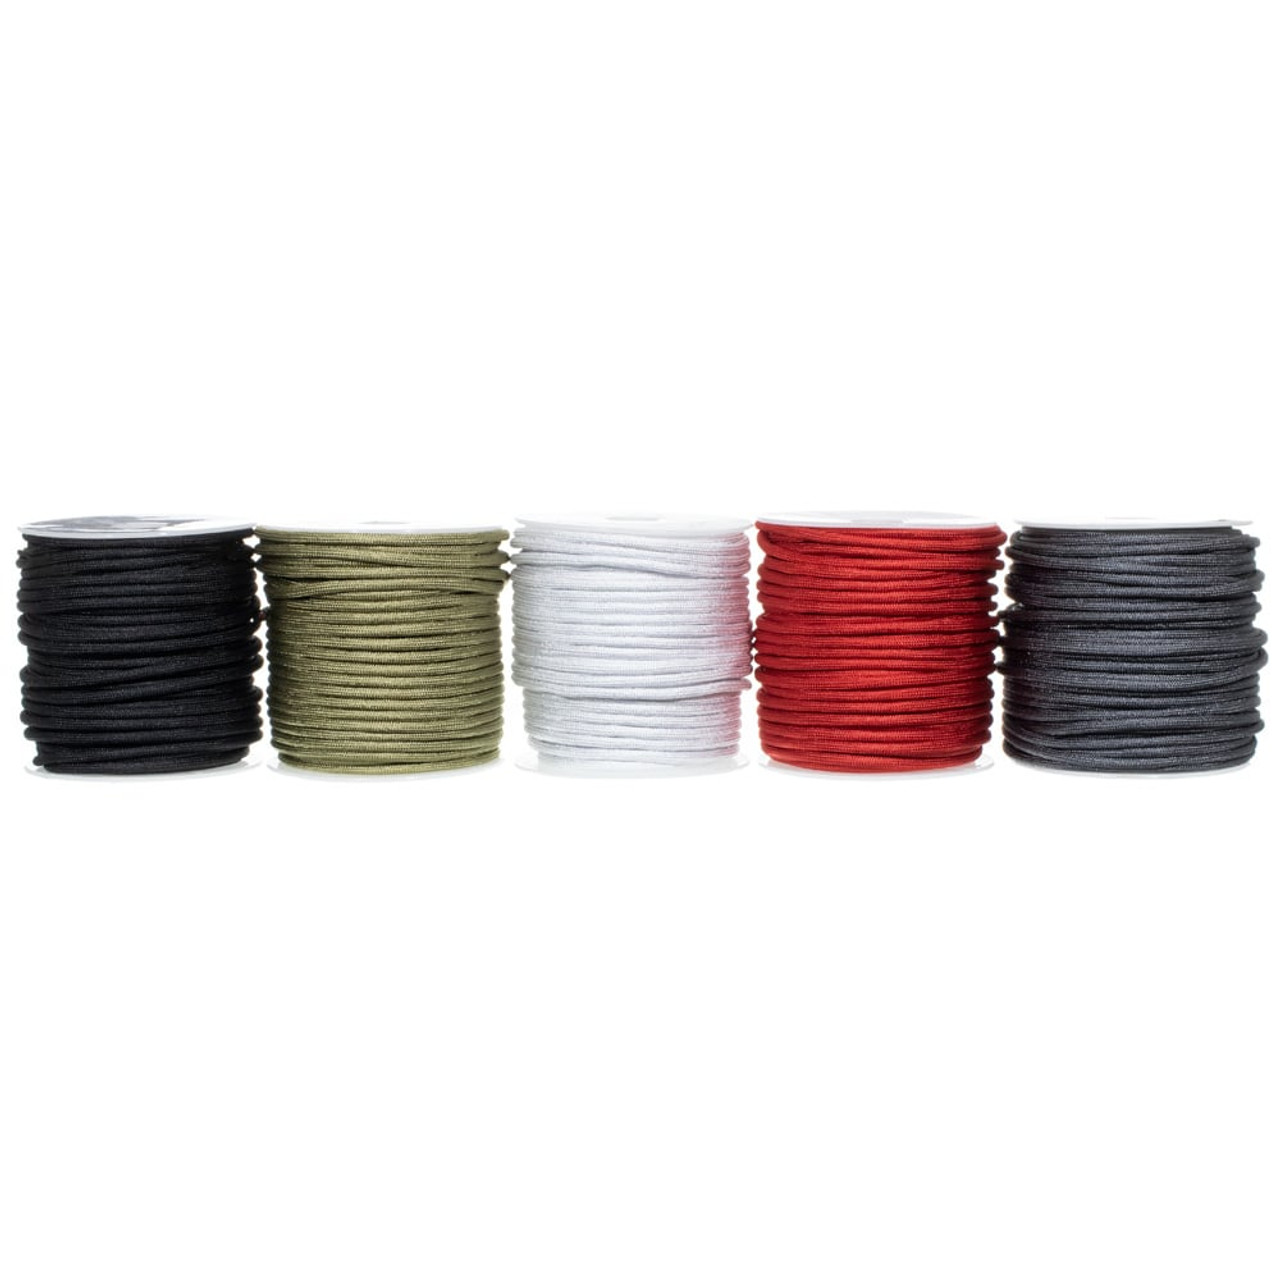 Polyester Paracord / Parachute Cord - 100ft - SAFETY YELLOW